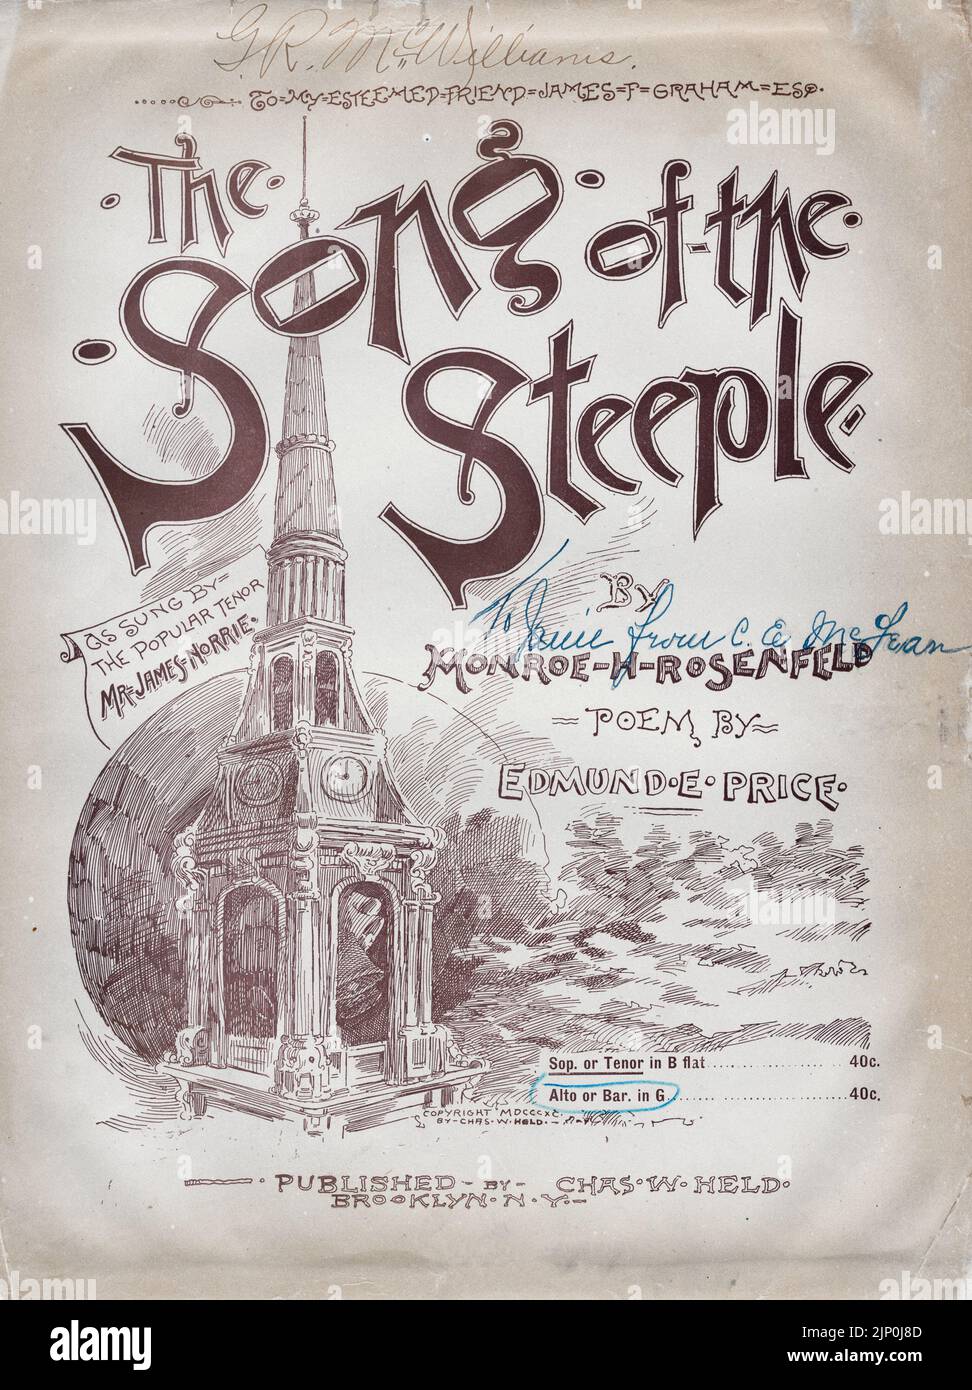 The Song of the Steeple, by Monroe H. Rosenfeld, Poem by Edmund E. Price, Published by Chas. W. Held (1890) Sheet music cover Stock Photo